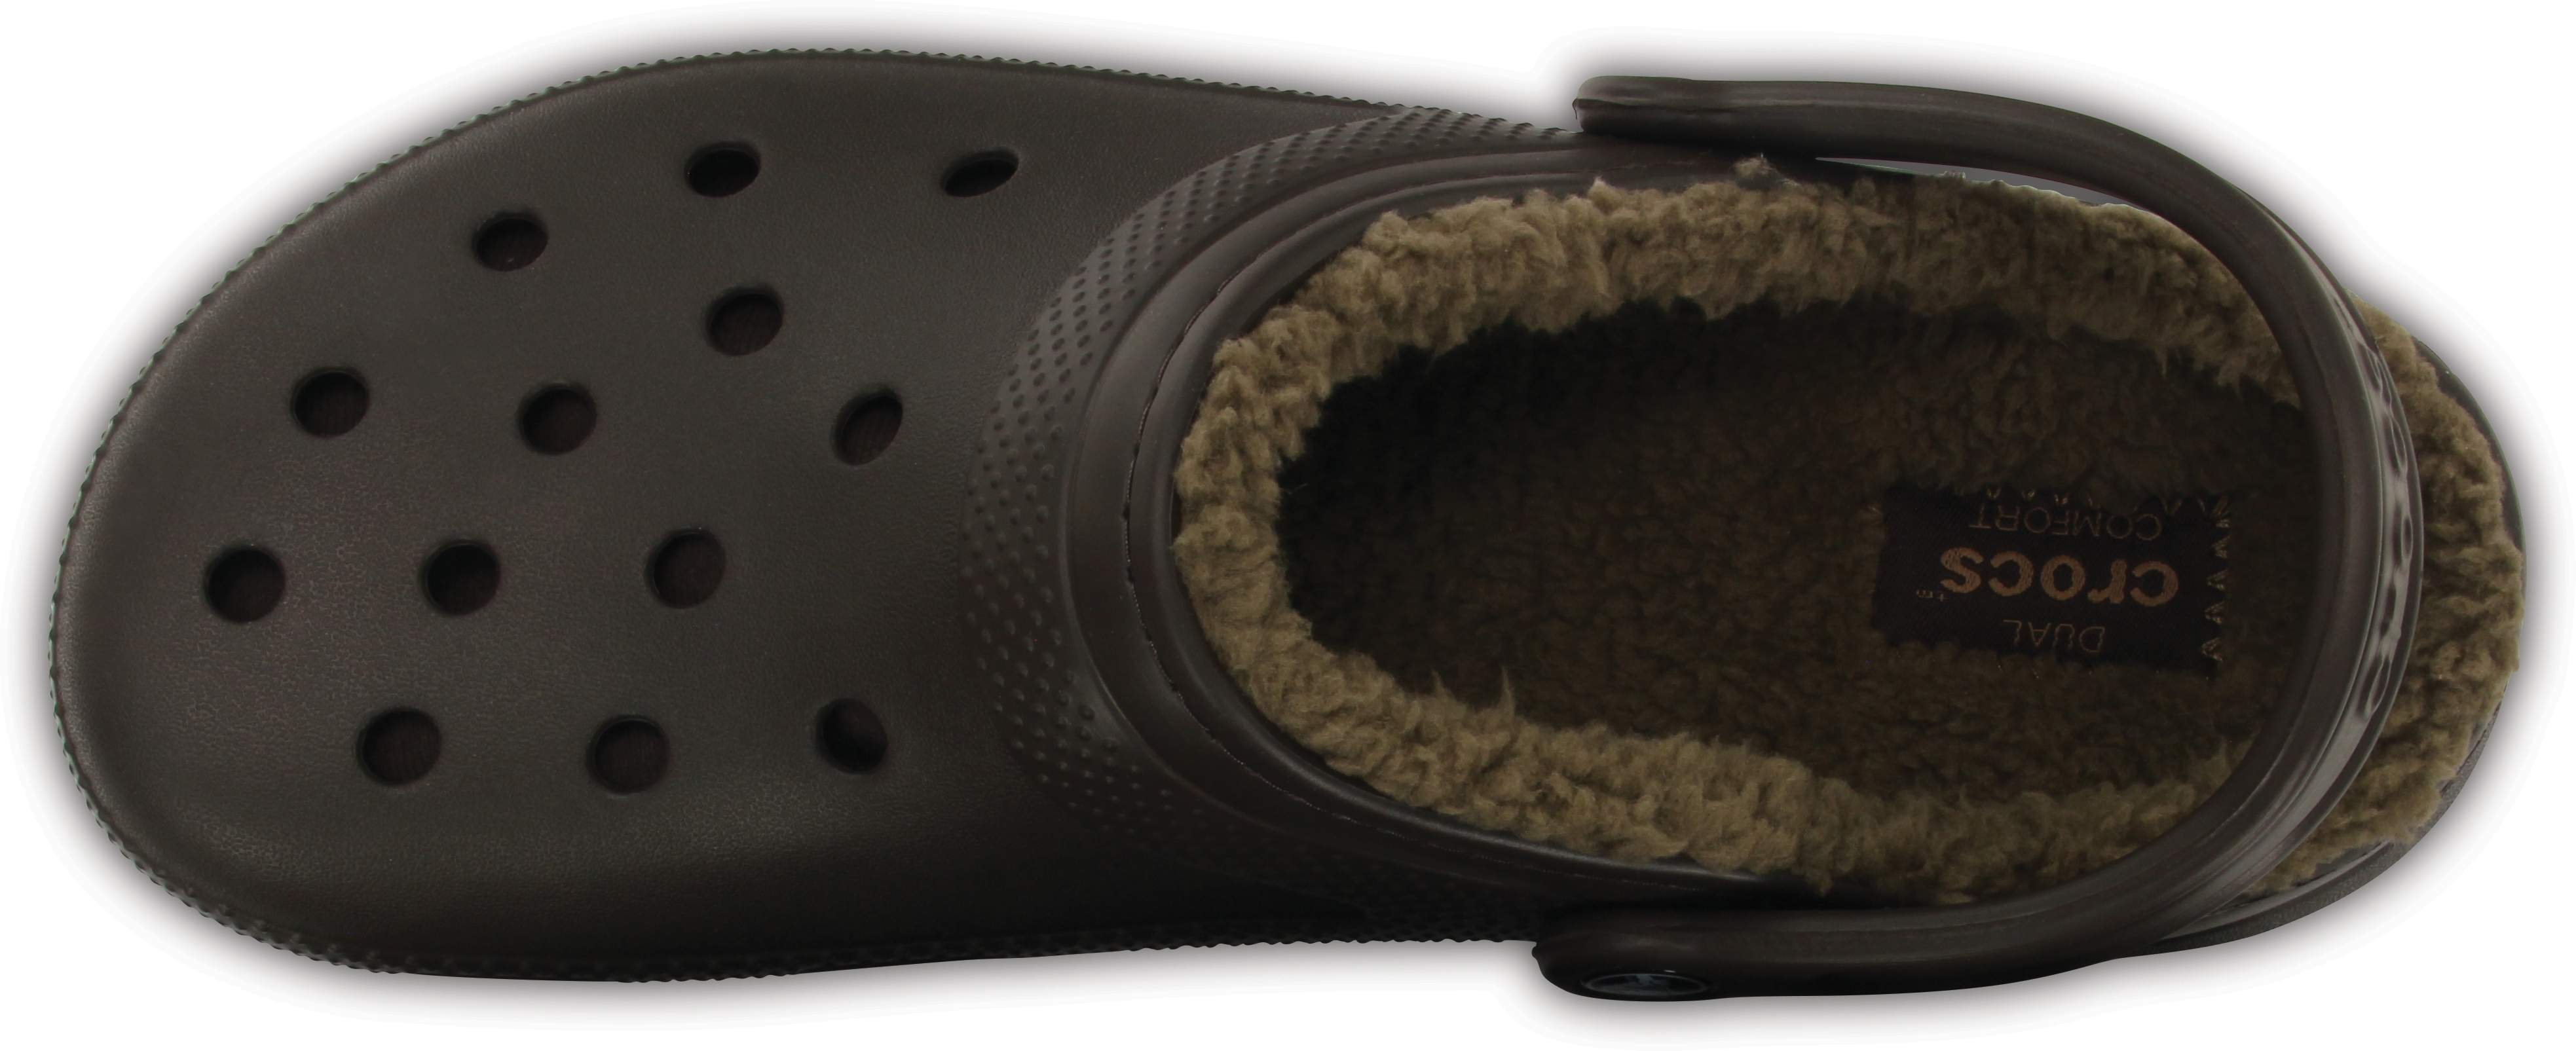 insulated clogs